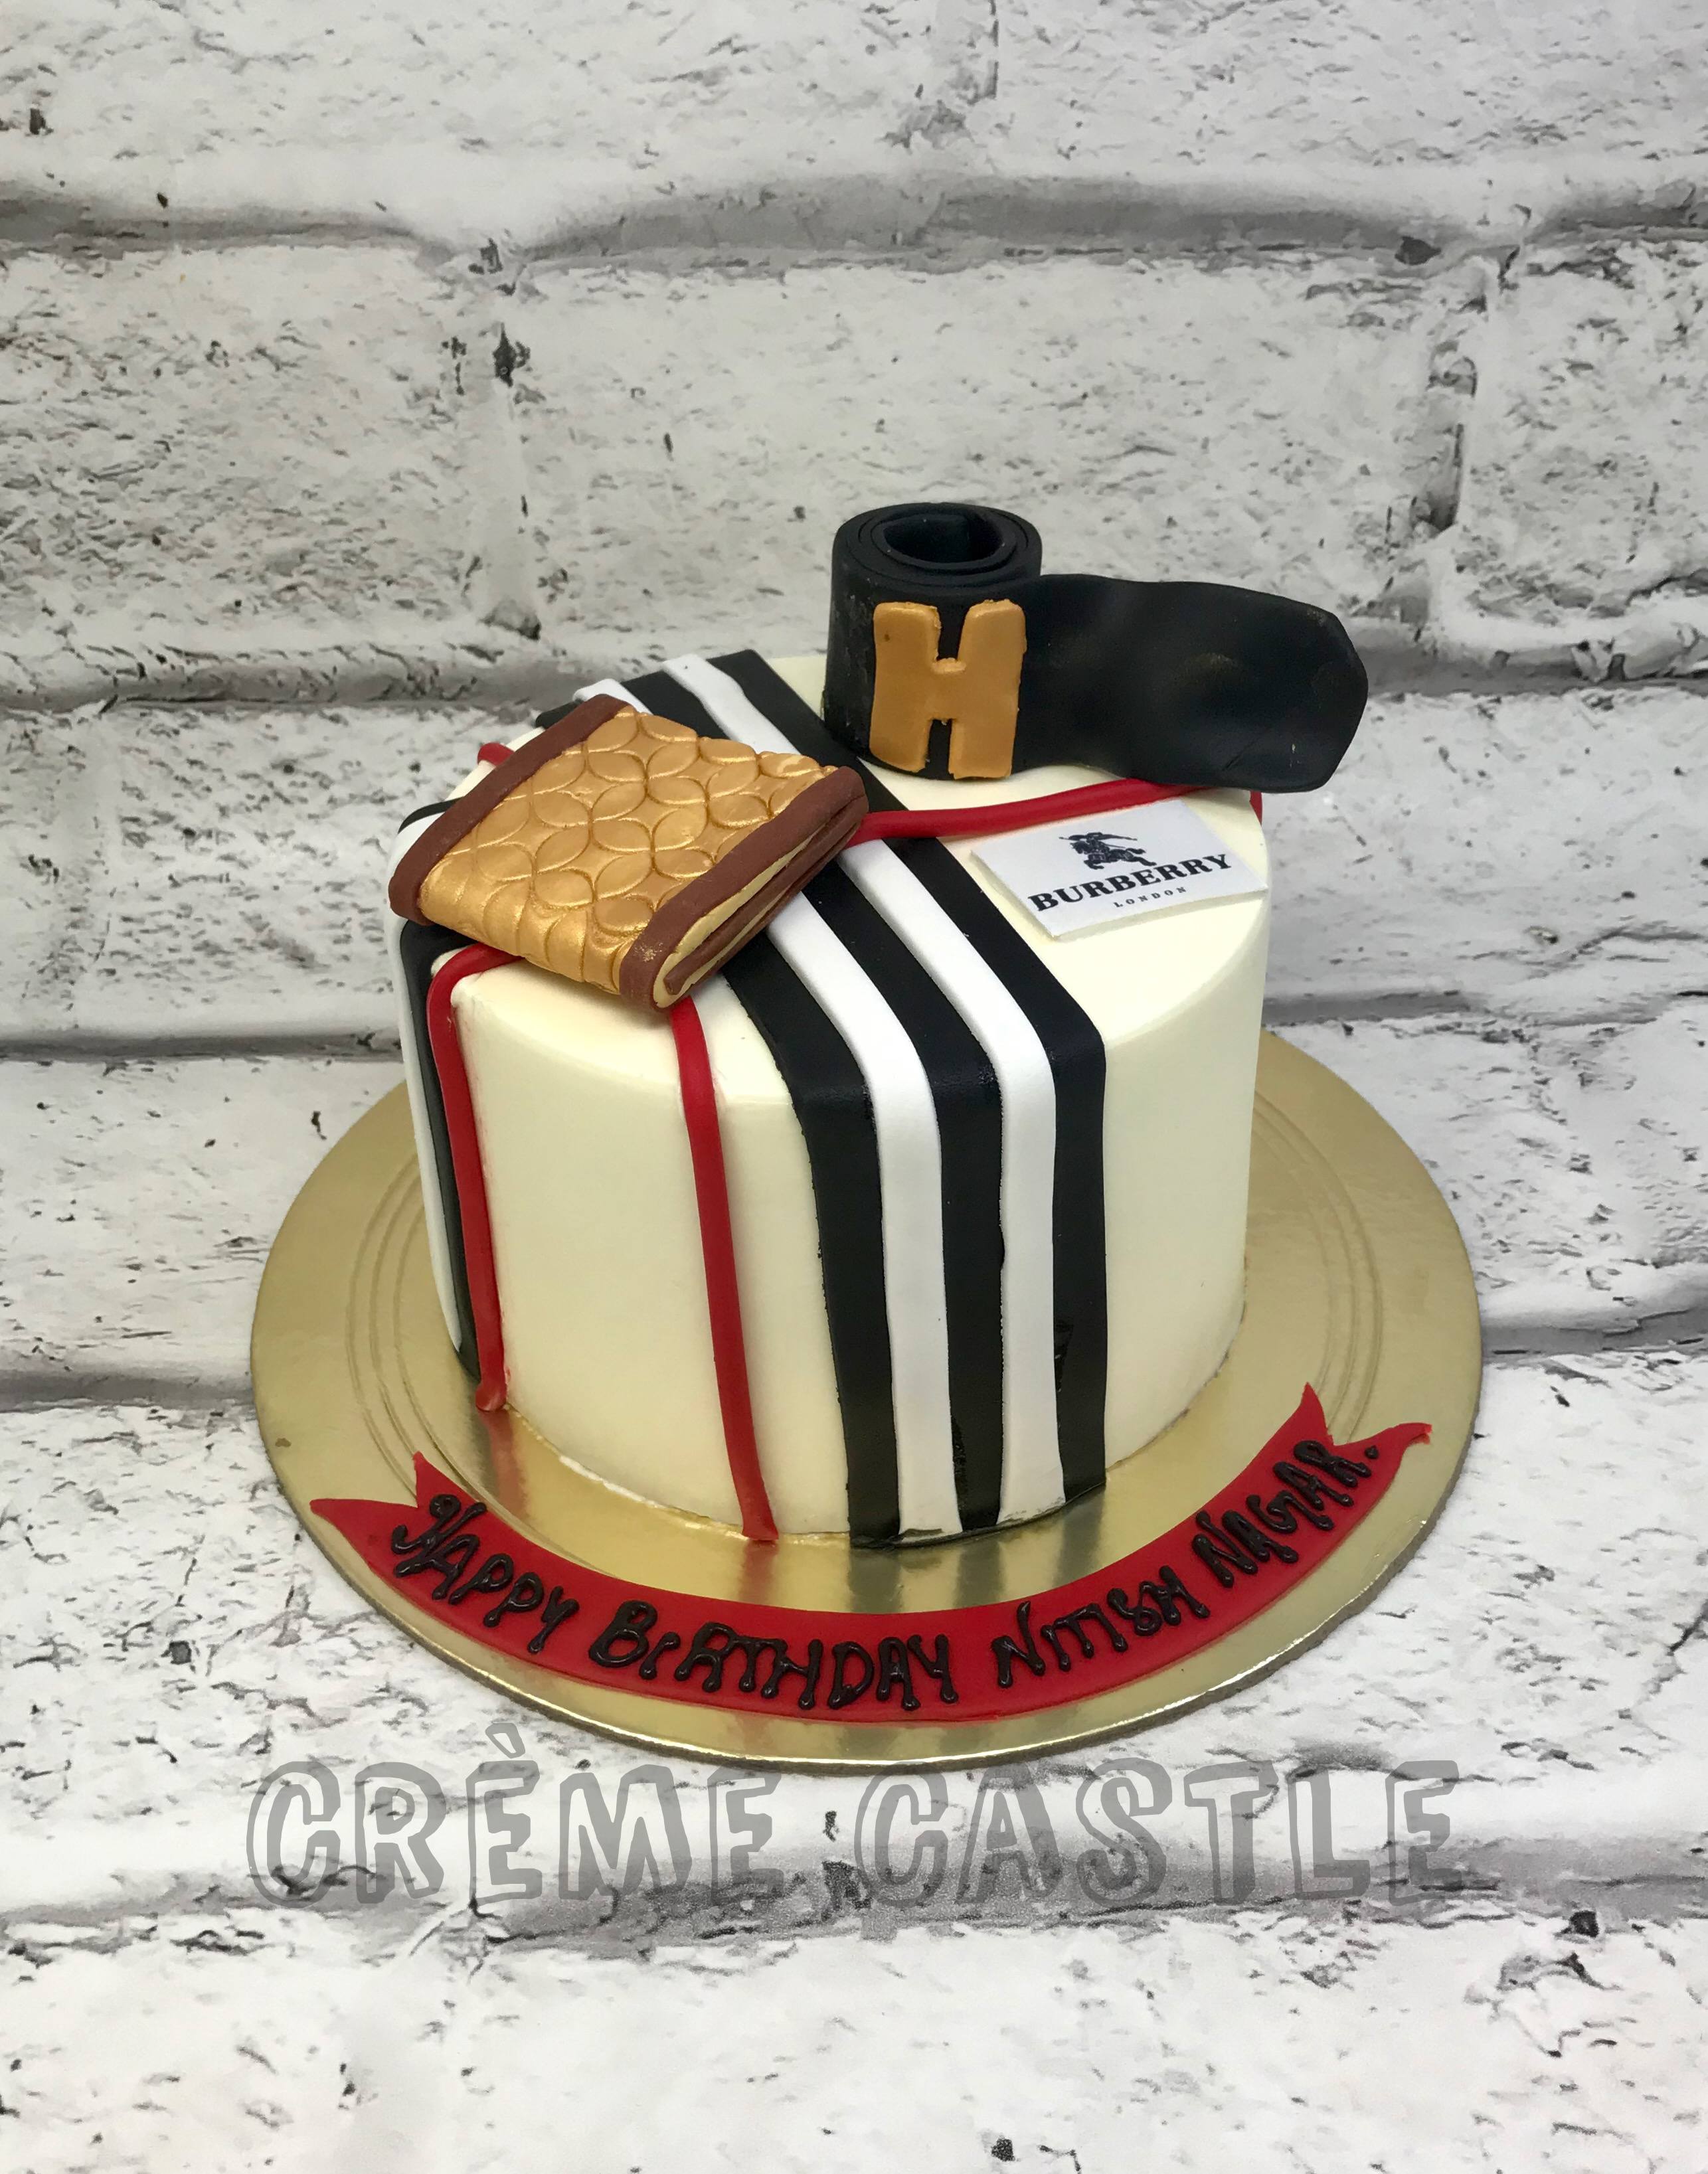 Customized tailor cake design... - The House Of Cakes Bakery | Facebook